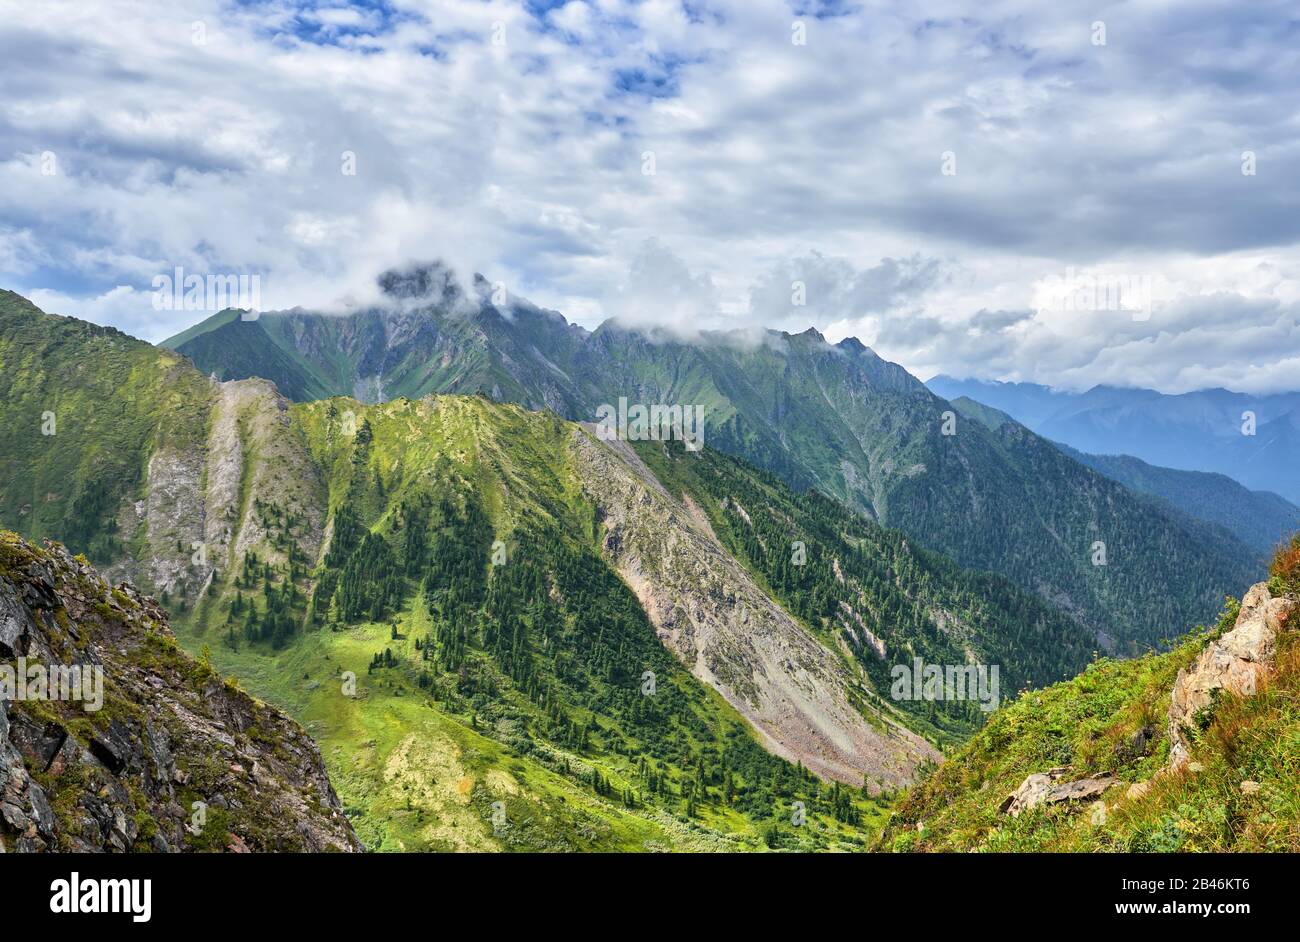 Overcast clouds over mountain ranges Stock Photo